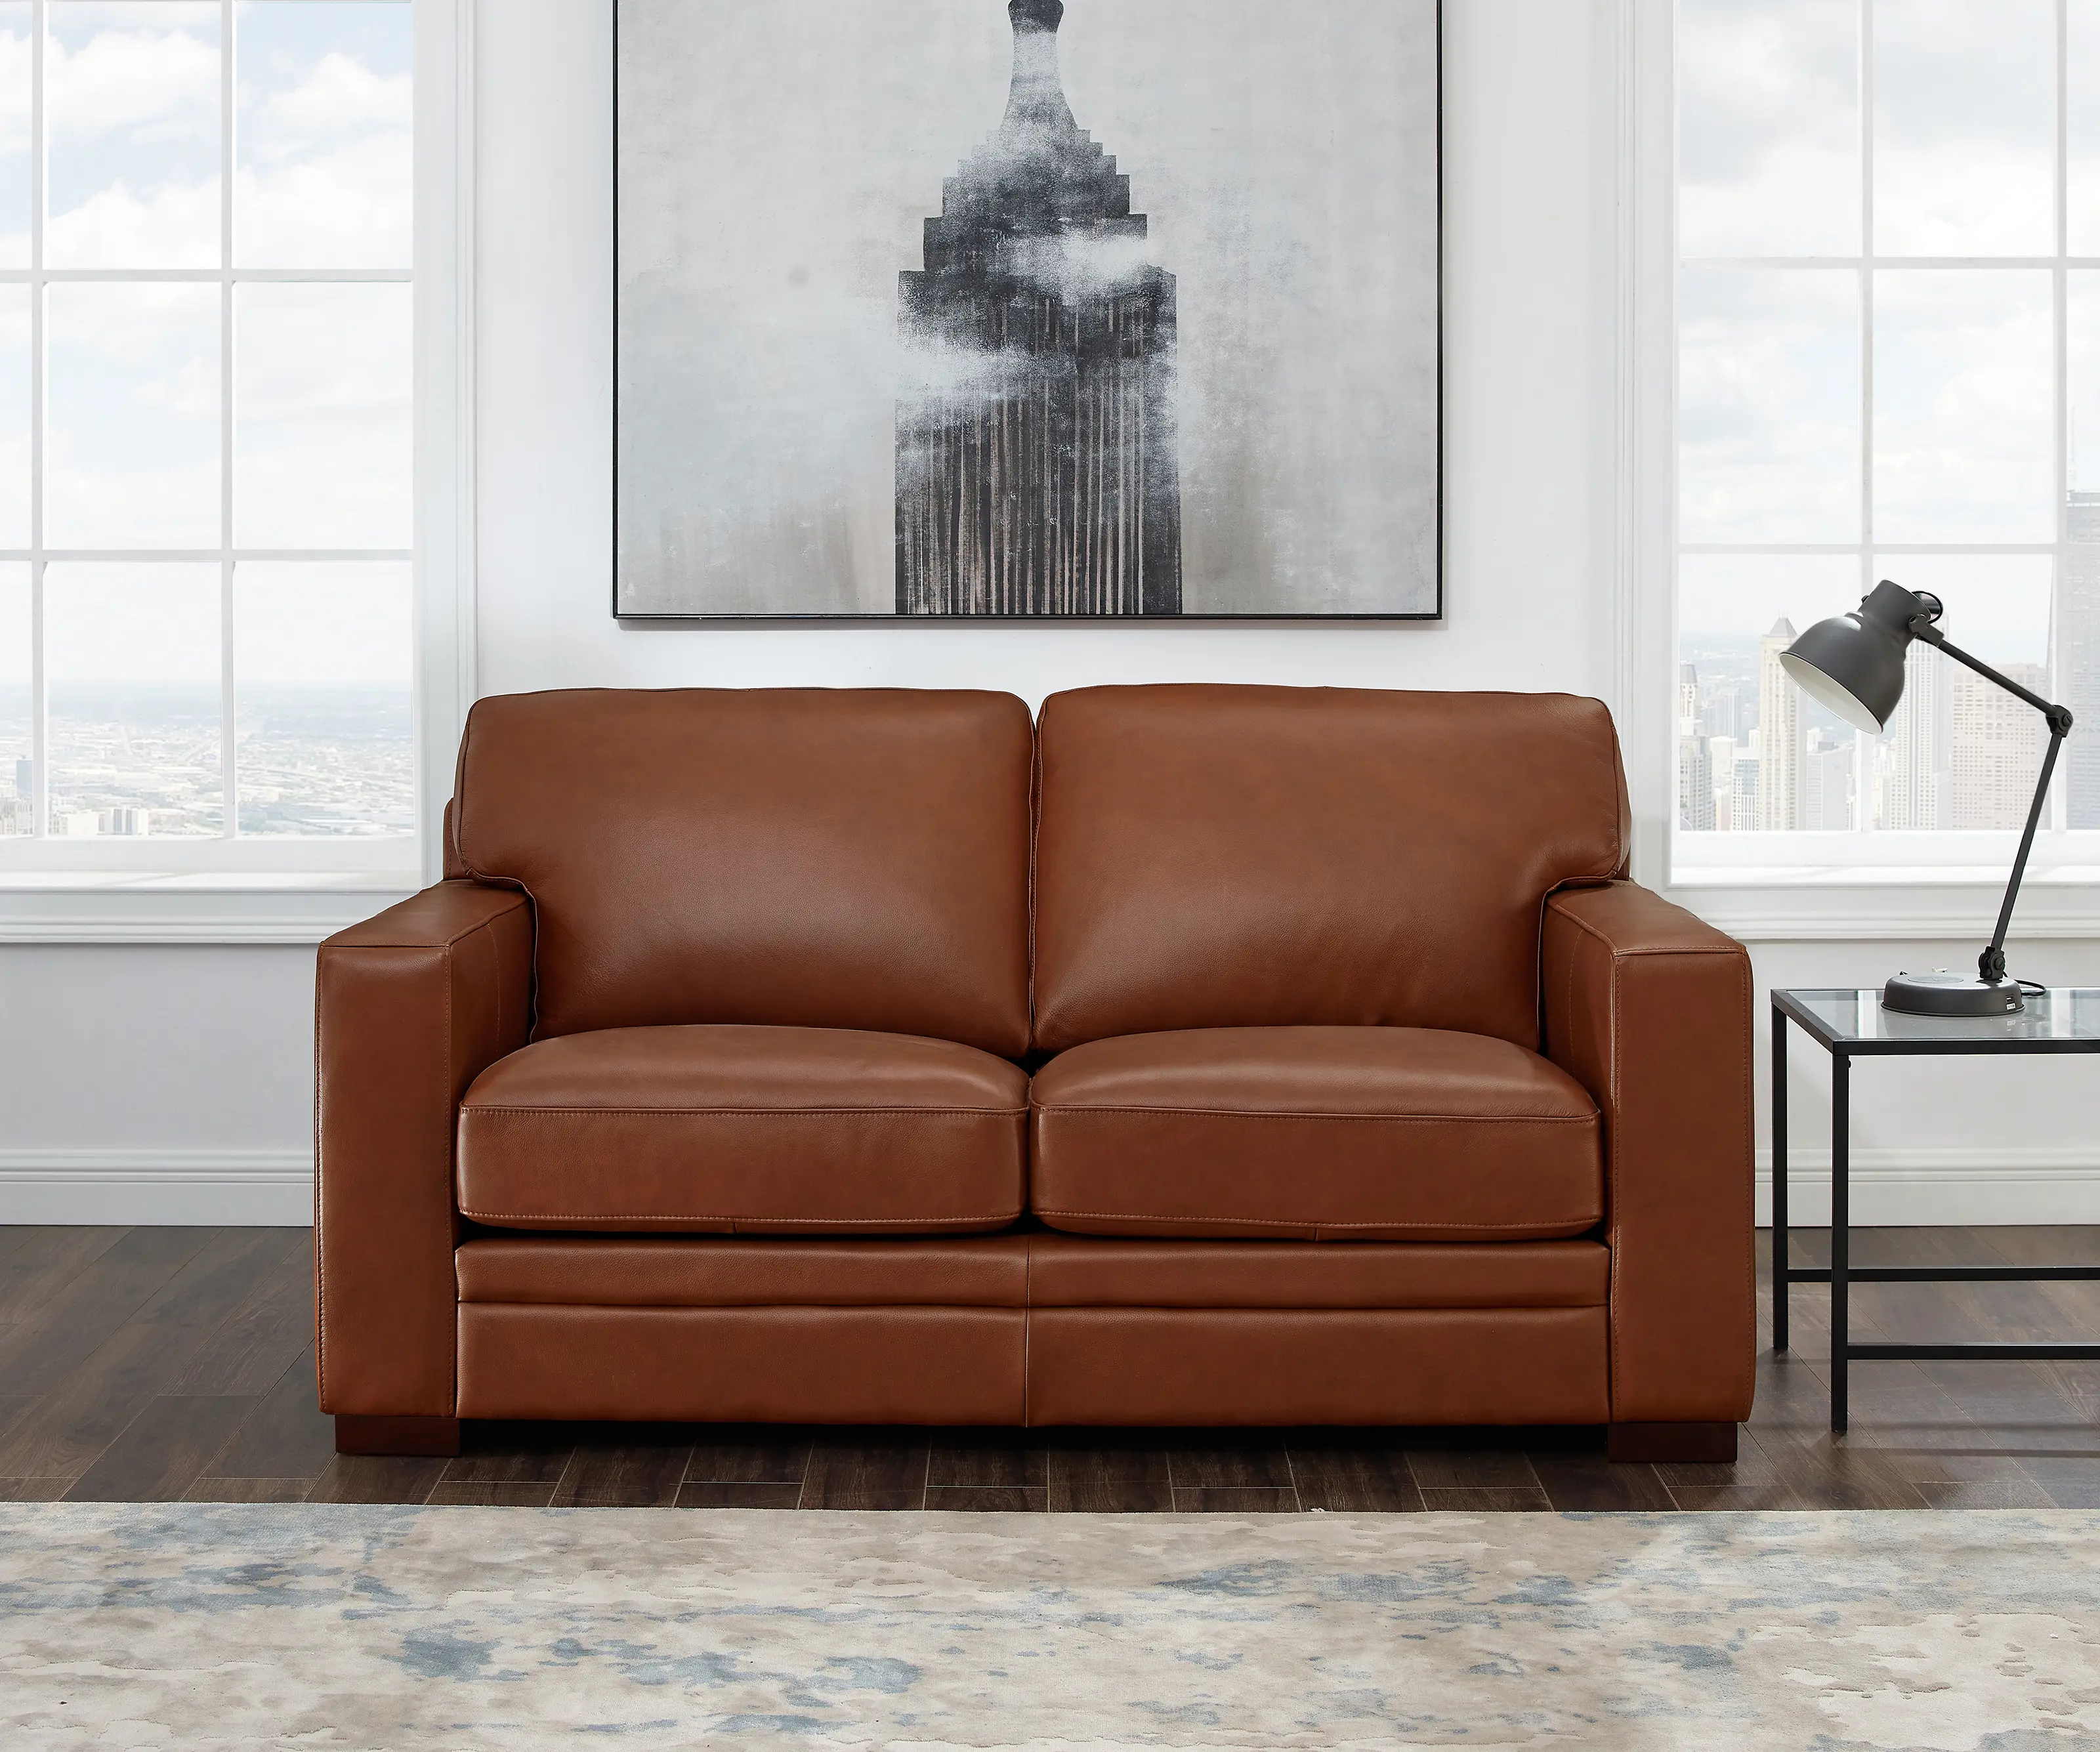 Chatsworth Brown Leather Loveseat - Amax Leather